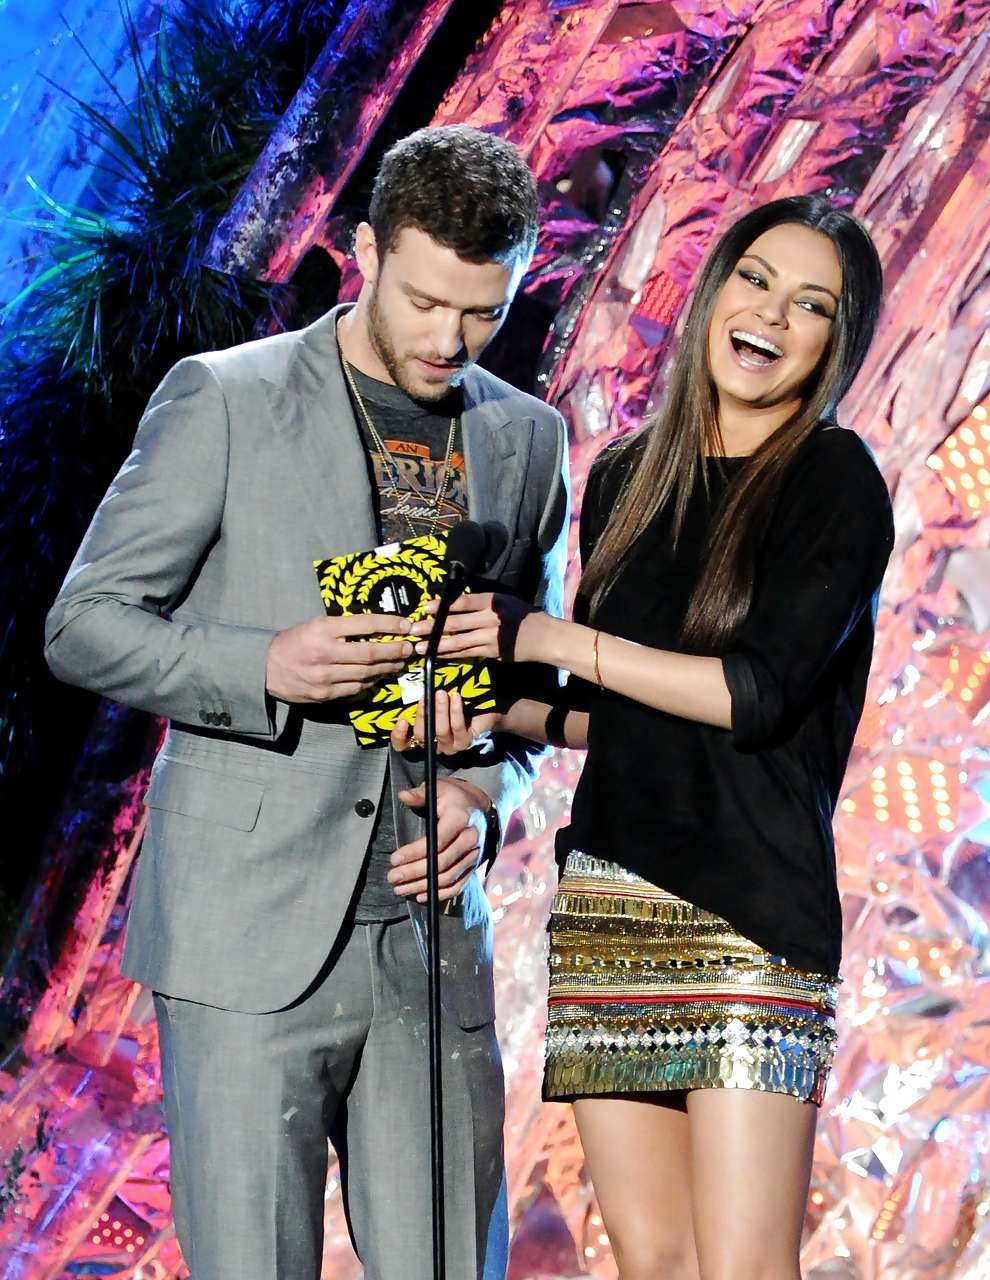 Mila Kunis gets her tits grabbed by Justin Timberlake paparazzi pictures #75299995